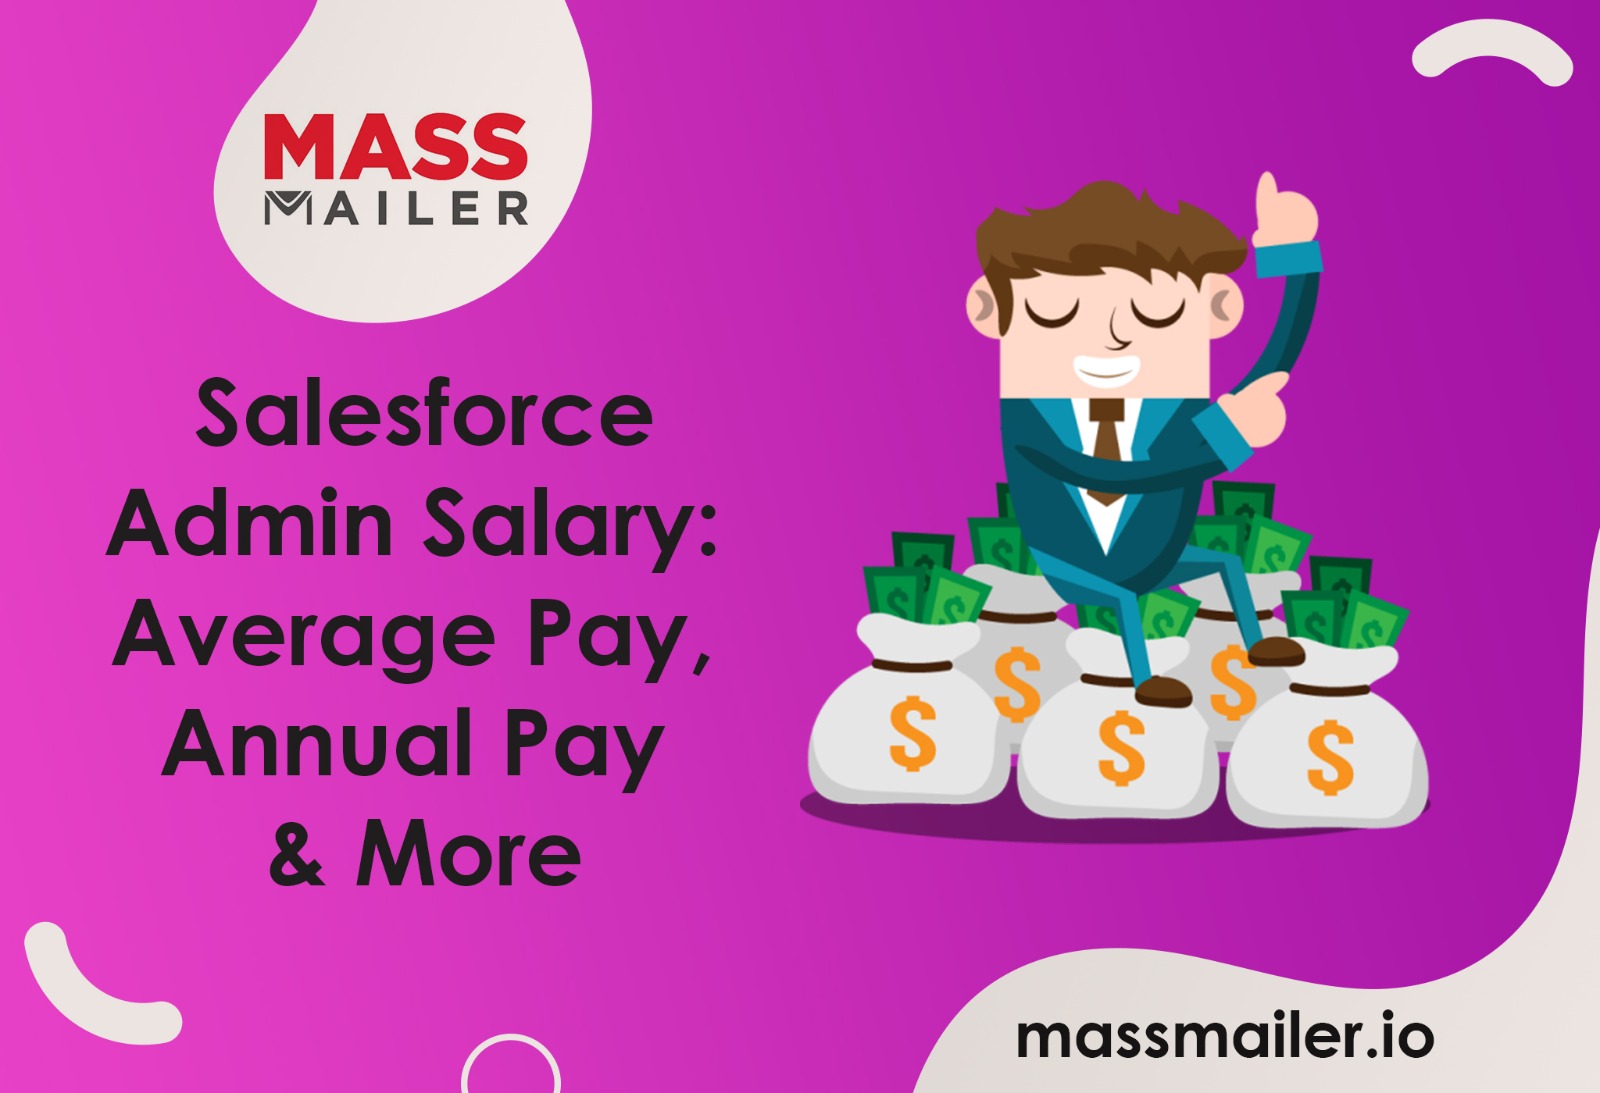 Salesforce Admin Salary: Average Pay, Annual Pay, and More